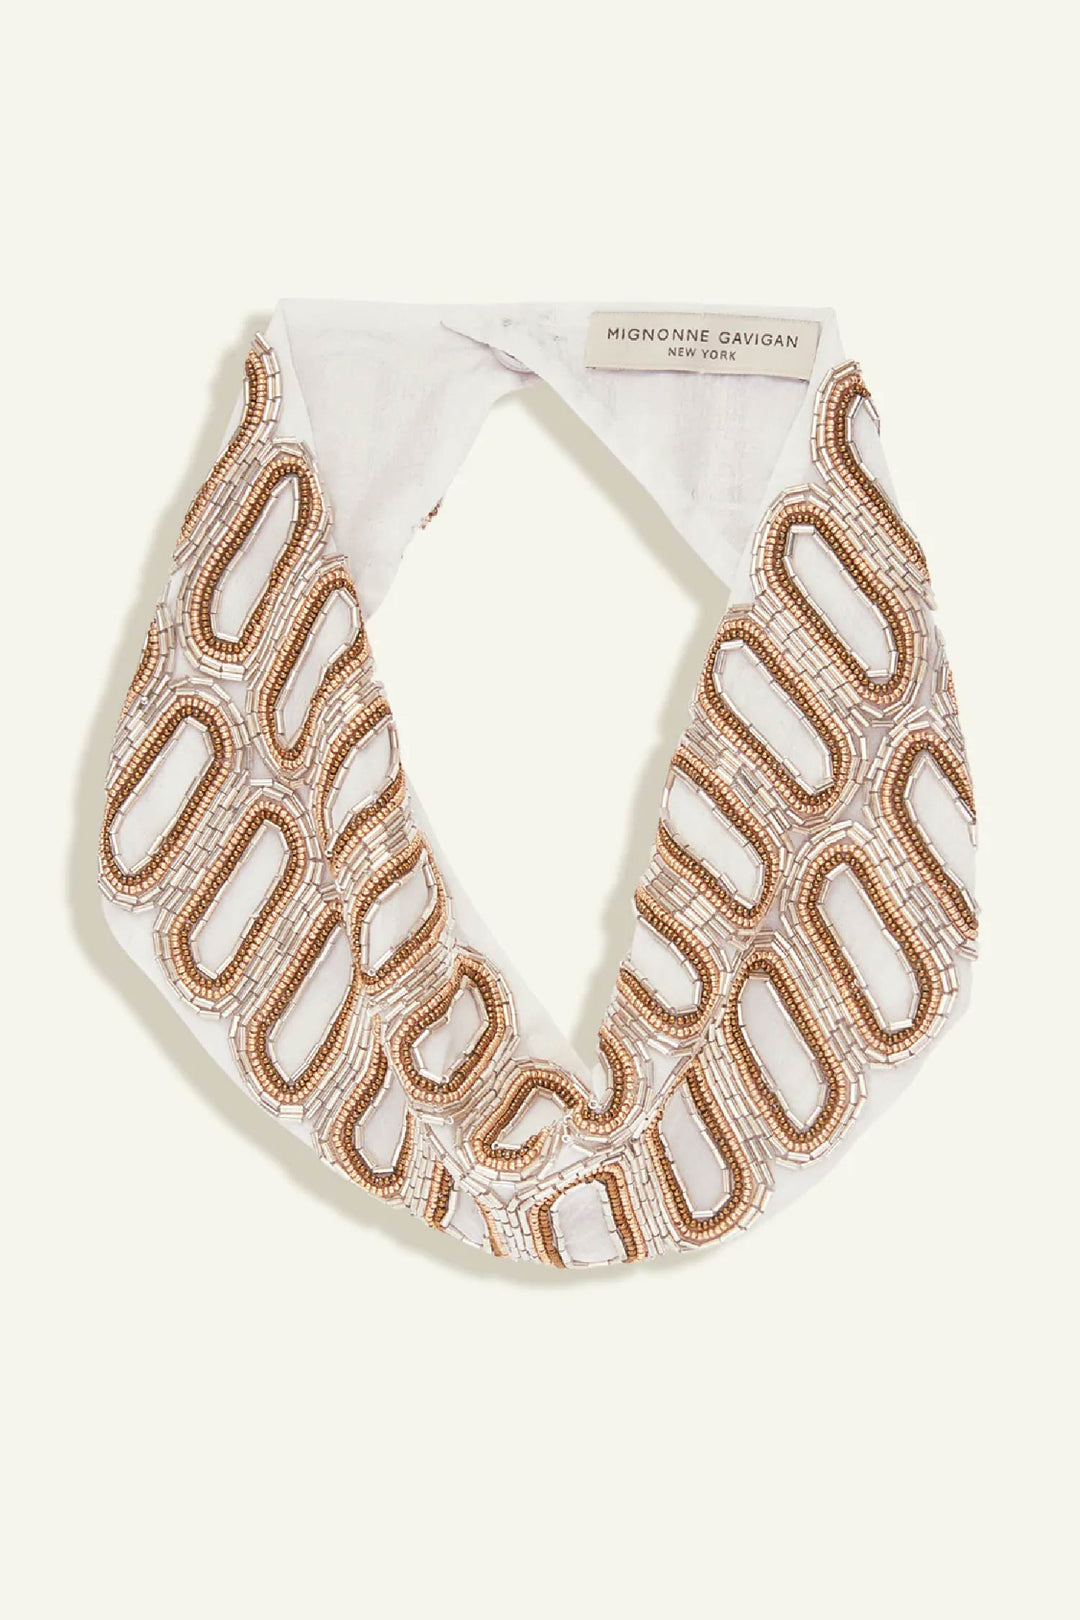 THORA SCARF NECKLACE- WHITE/GOLD